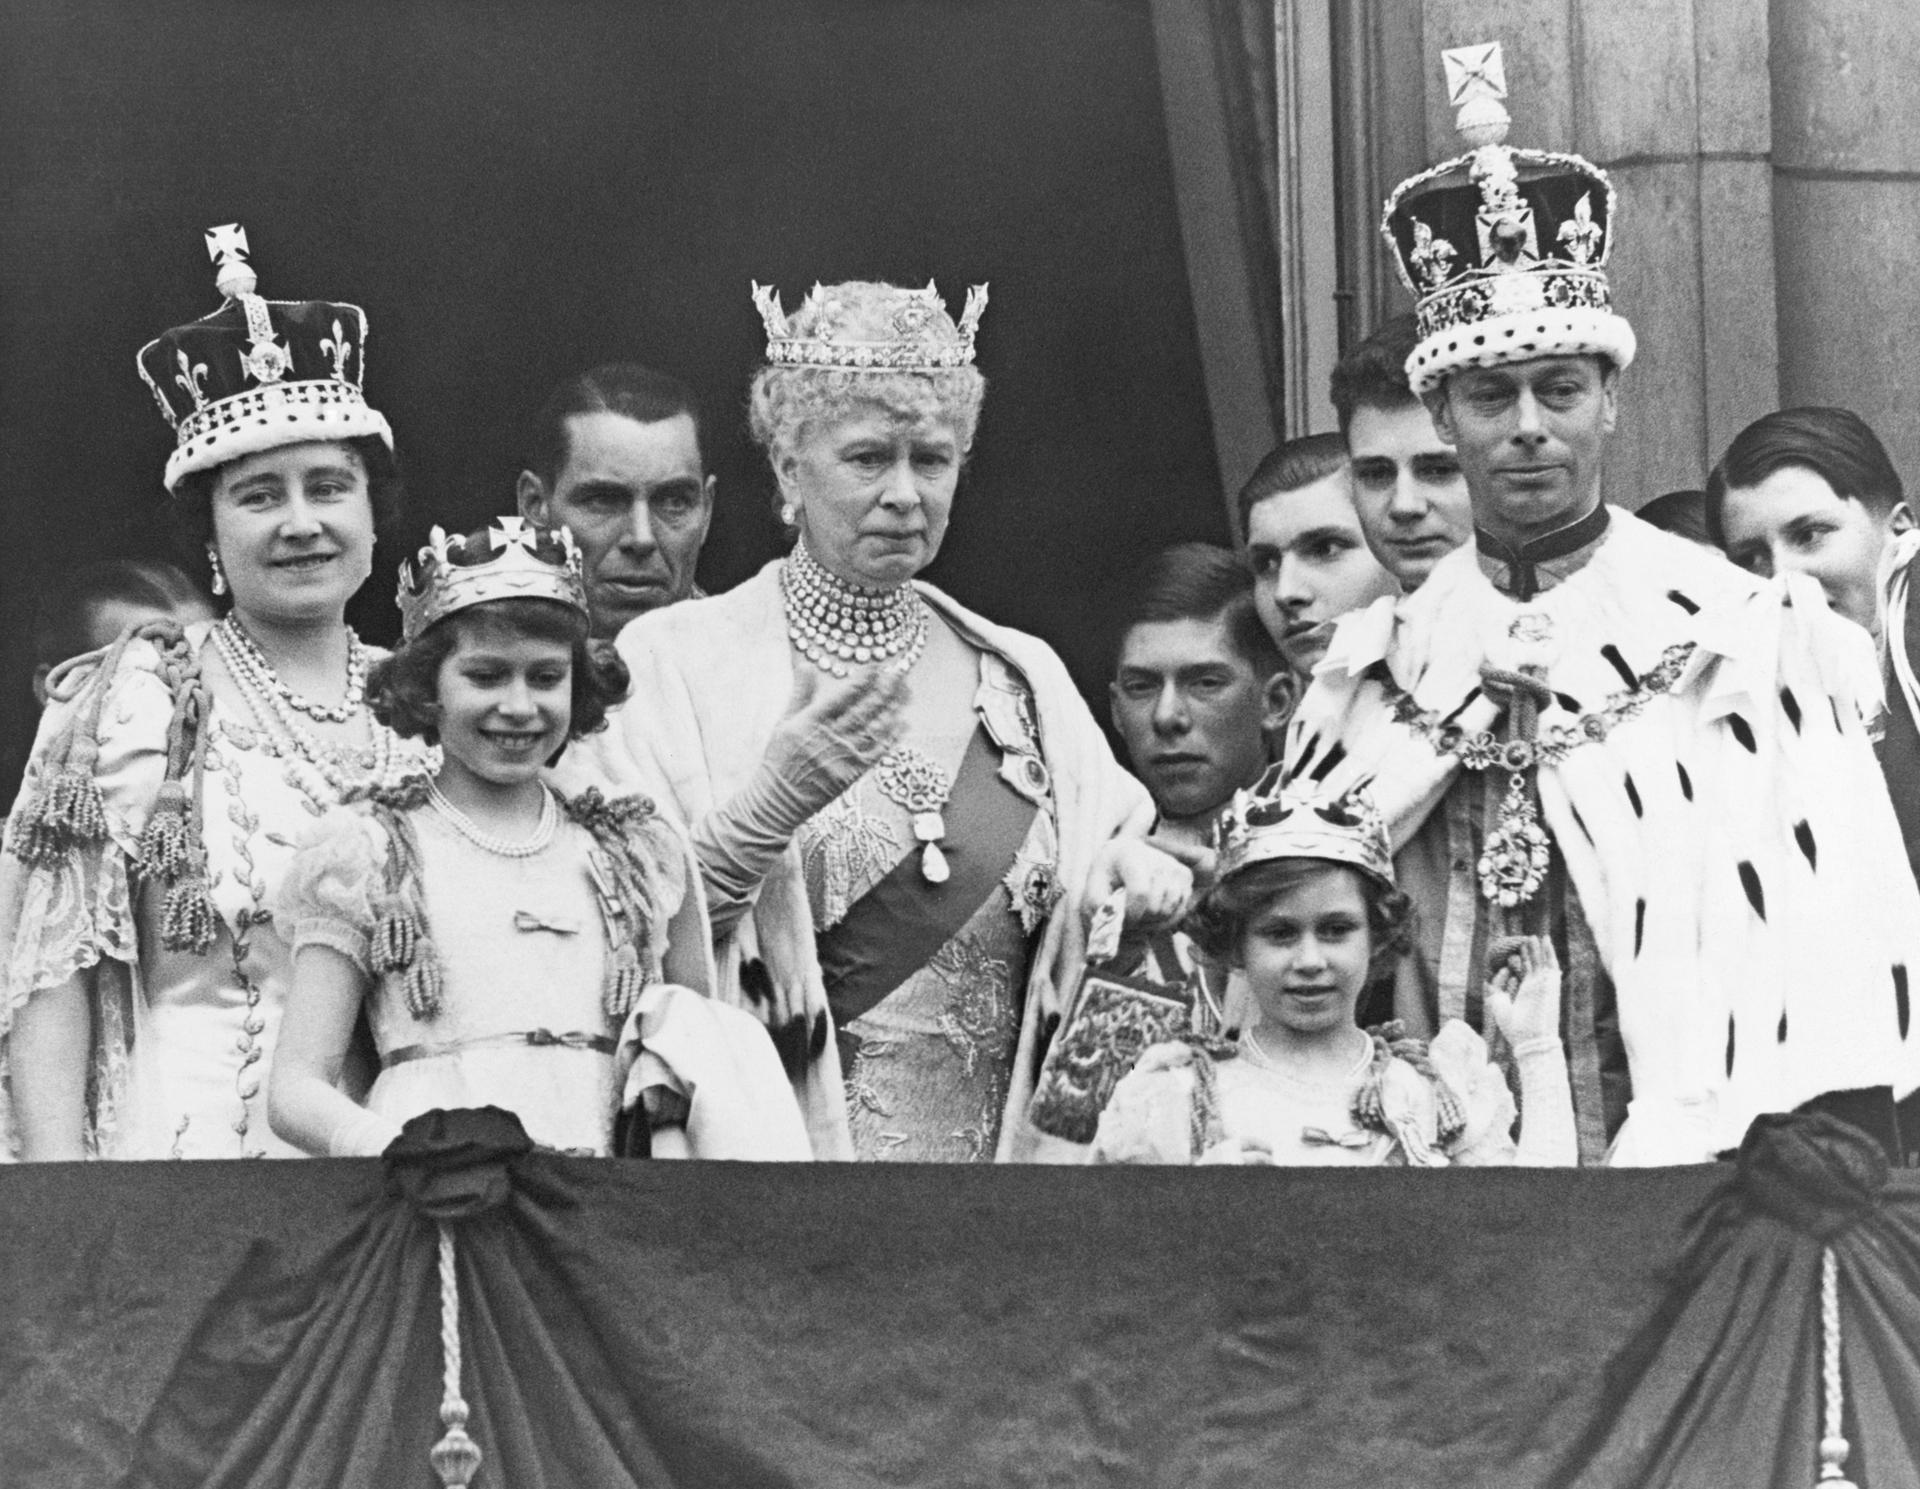 No Koh-i-Noor in royal coronation, but its intrigue continues to inspire